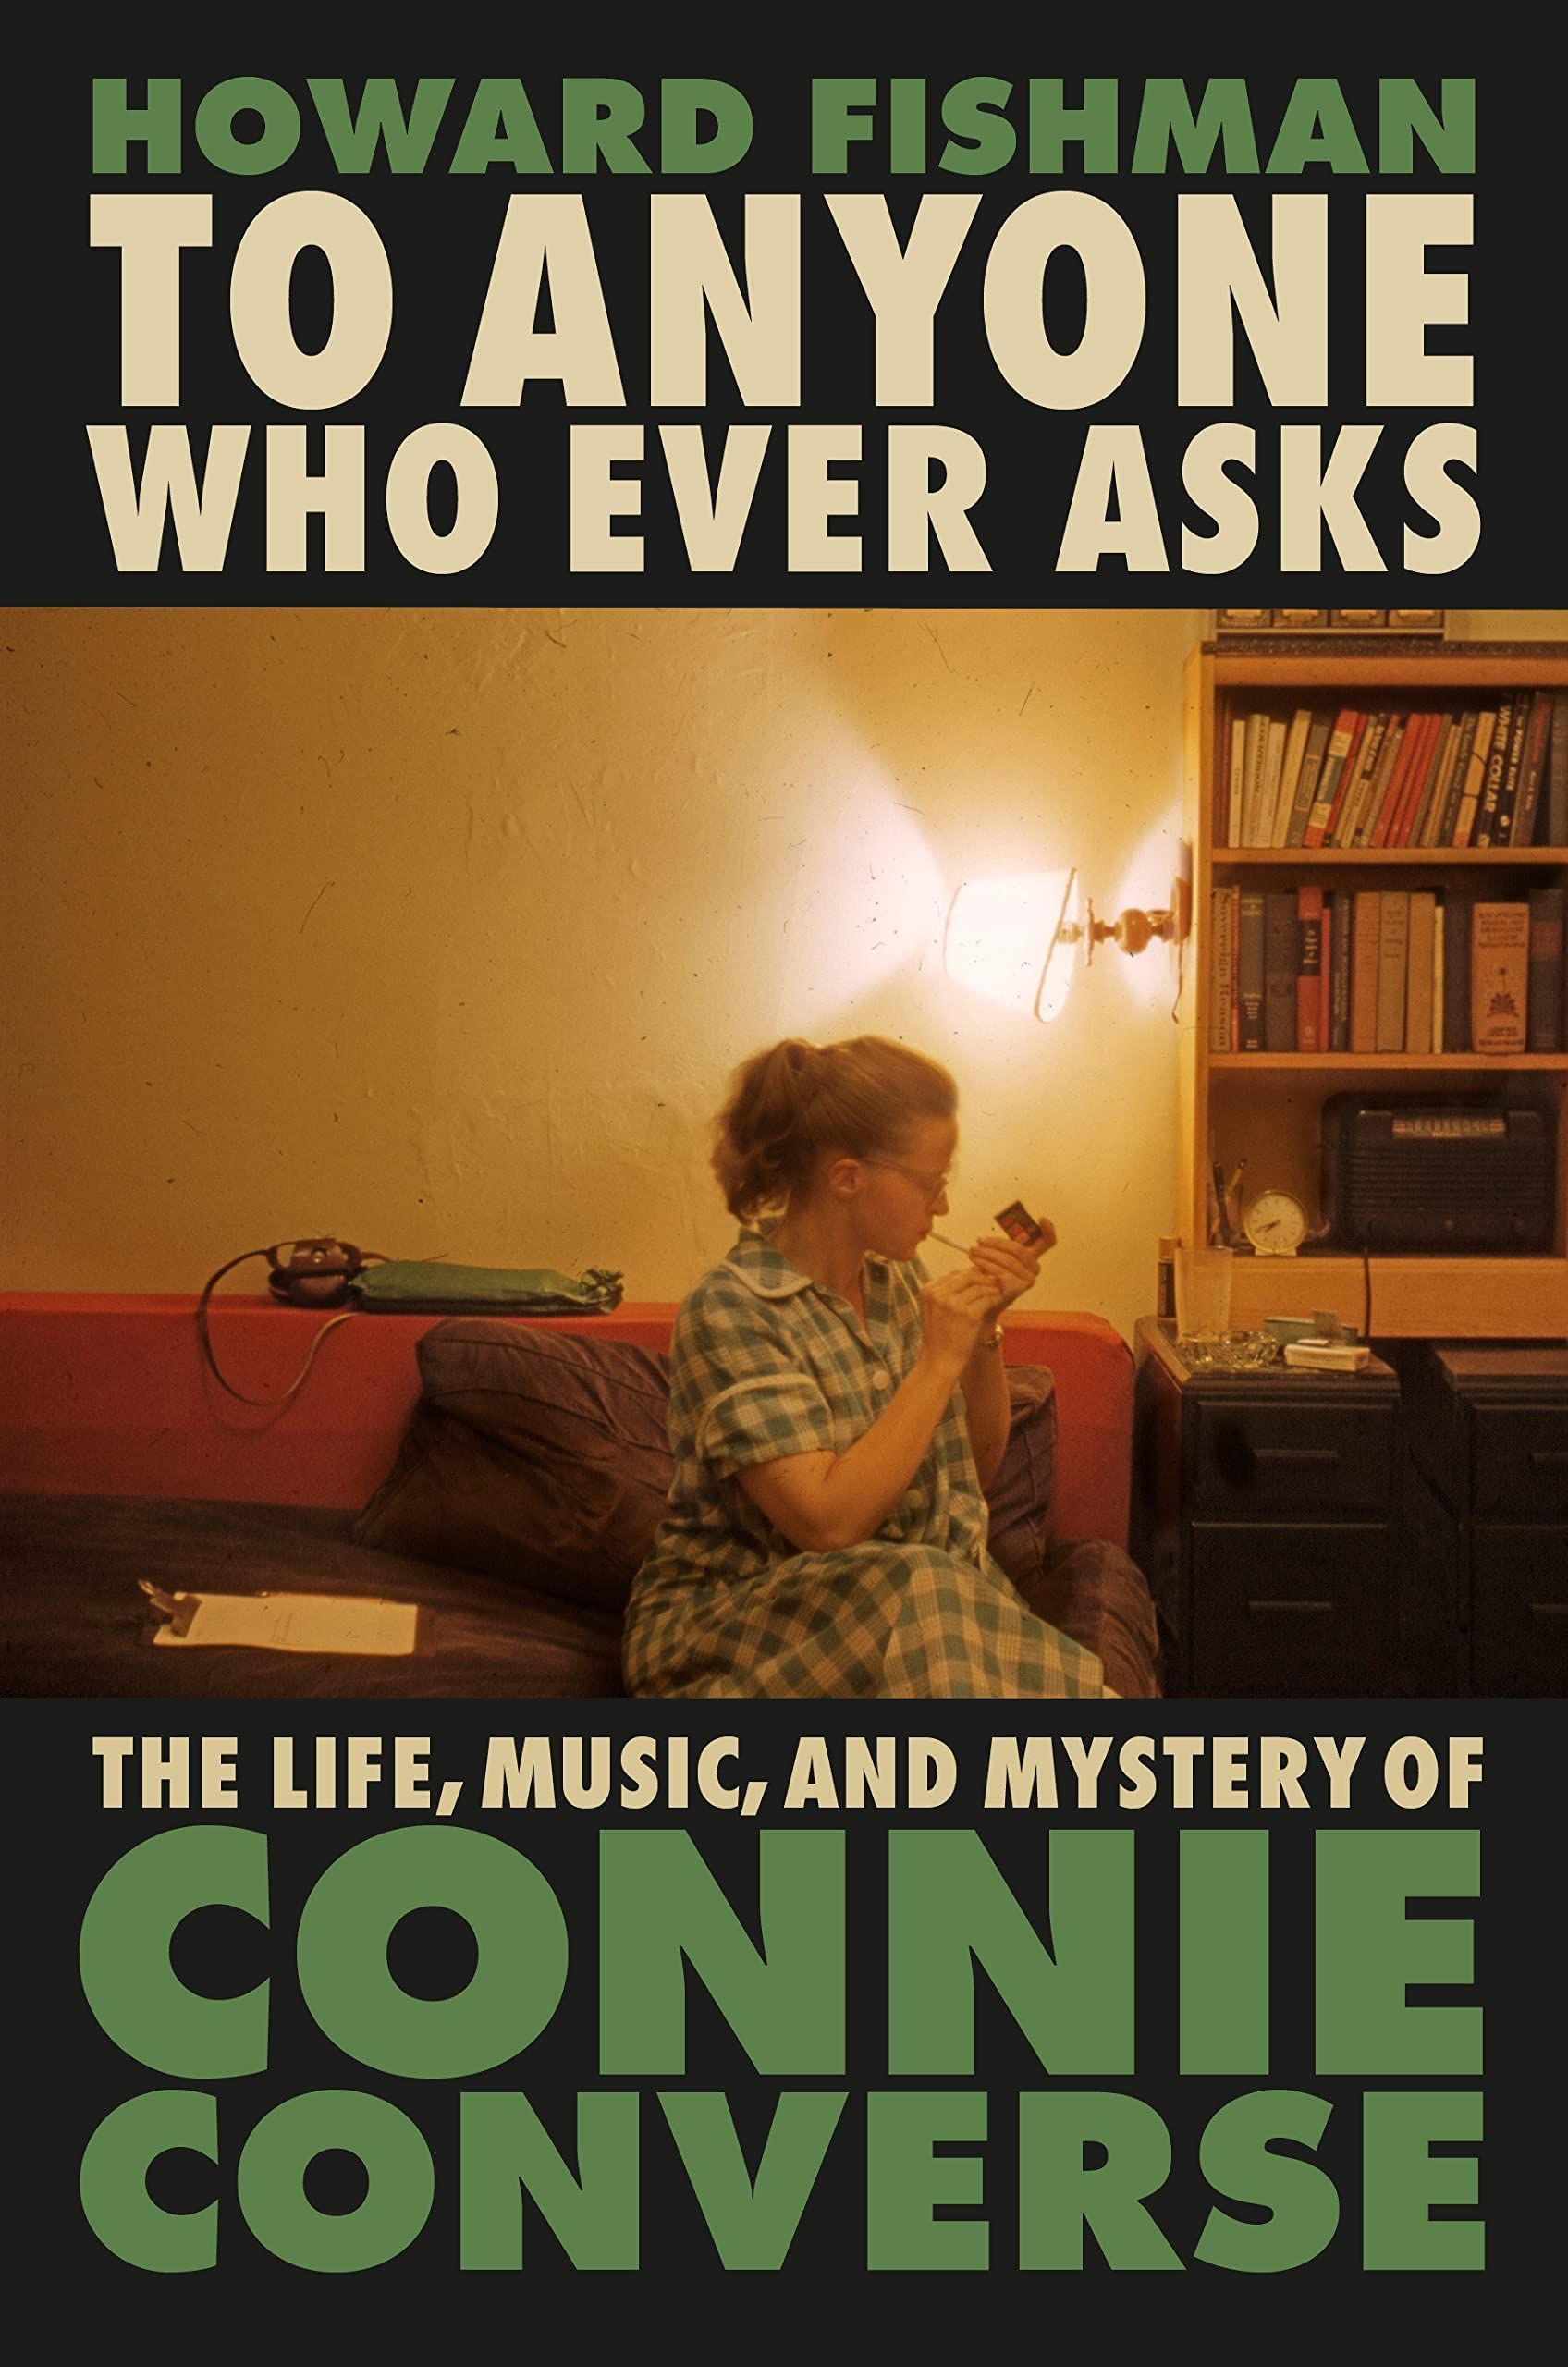 Someone Always Takes Me Home: On Howard Fishman’s “To Anyone Who Ever Asks”